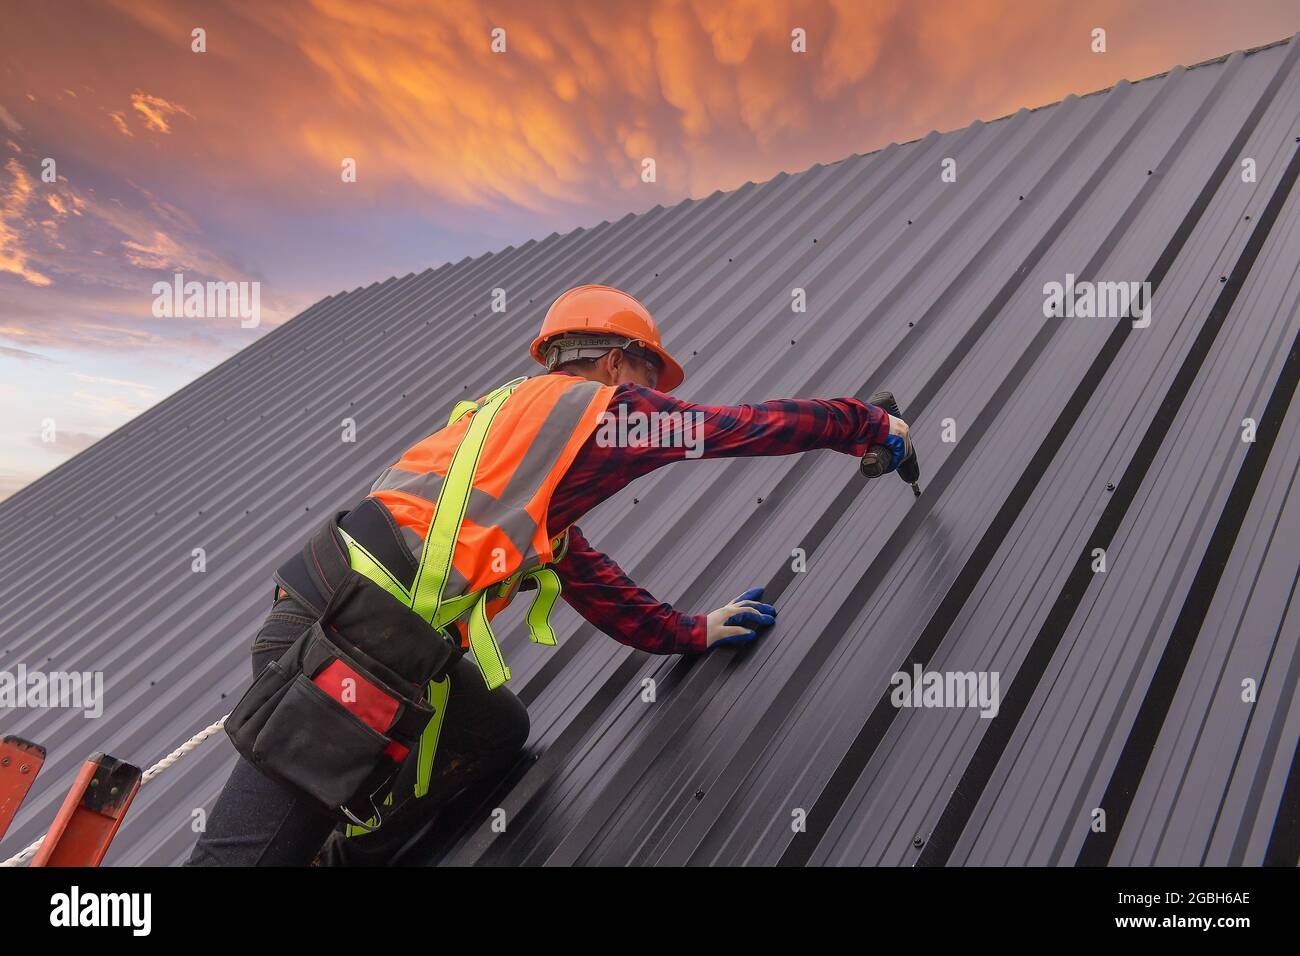 Construction worker installing metal sheets on a roof, Thailand Stock Photo